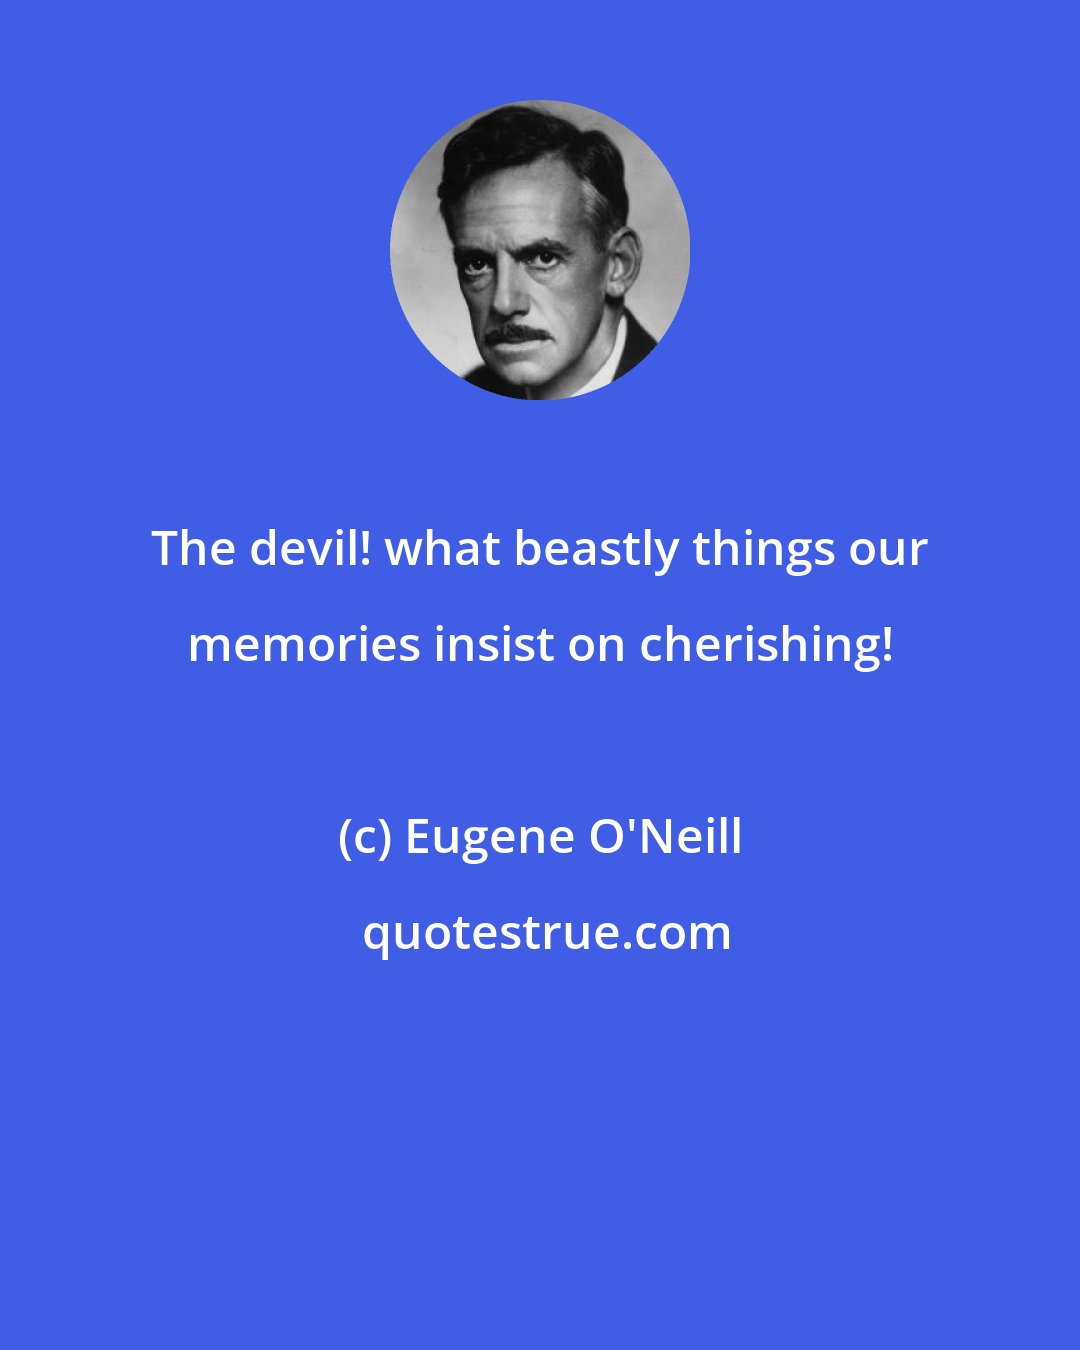 Eugene O'Neill: The devil! what beastly things our memories insist on cherishing!